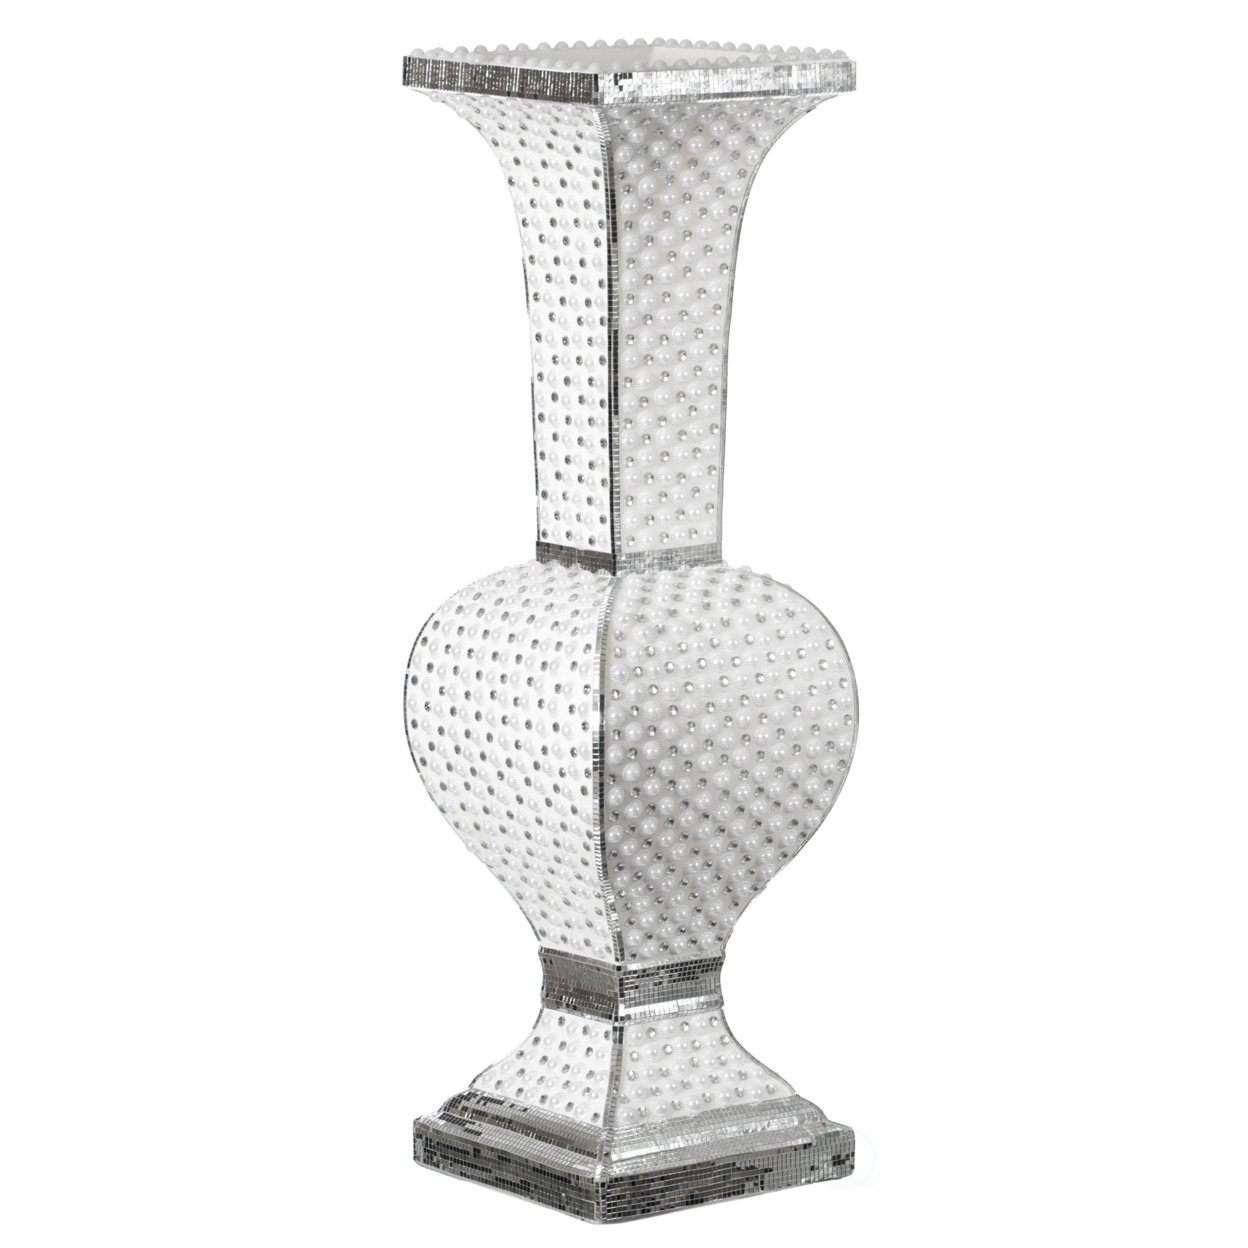 Contemporary Wedding Floor Flower Vase With Silver Studs And White Pearl Design, For Living Room, Entryway Or Dining Room, 40 Inch